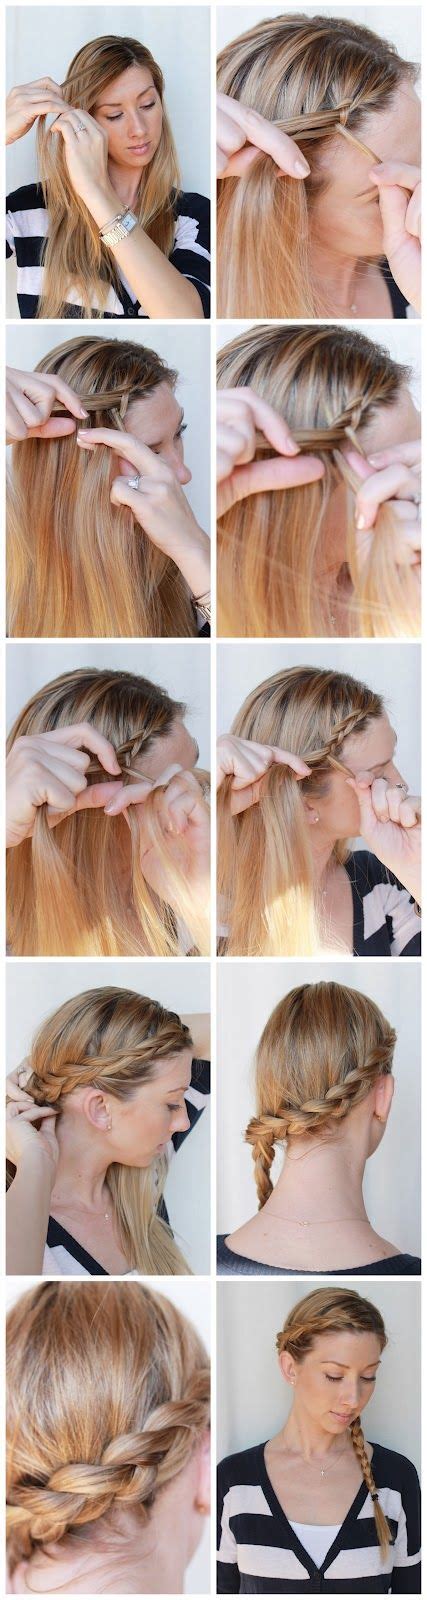 Check spelling or type a new query. How To Do A French Braid On Yourself For Beginners Step By Step - KORGMICROSTATIONPURCHASE